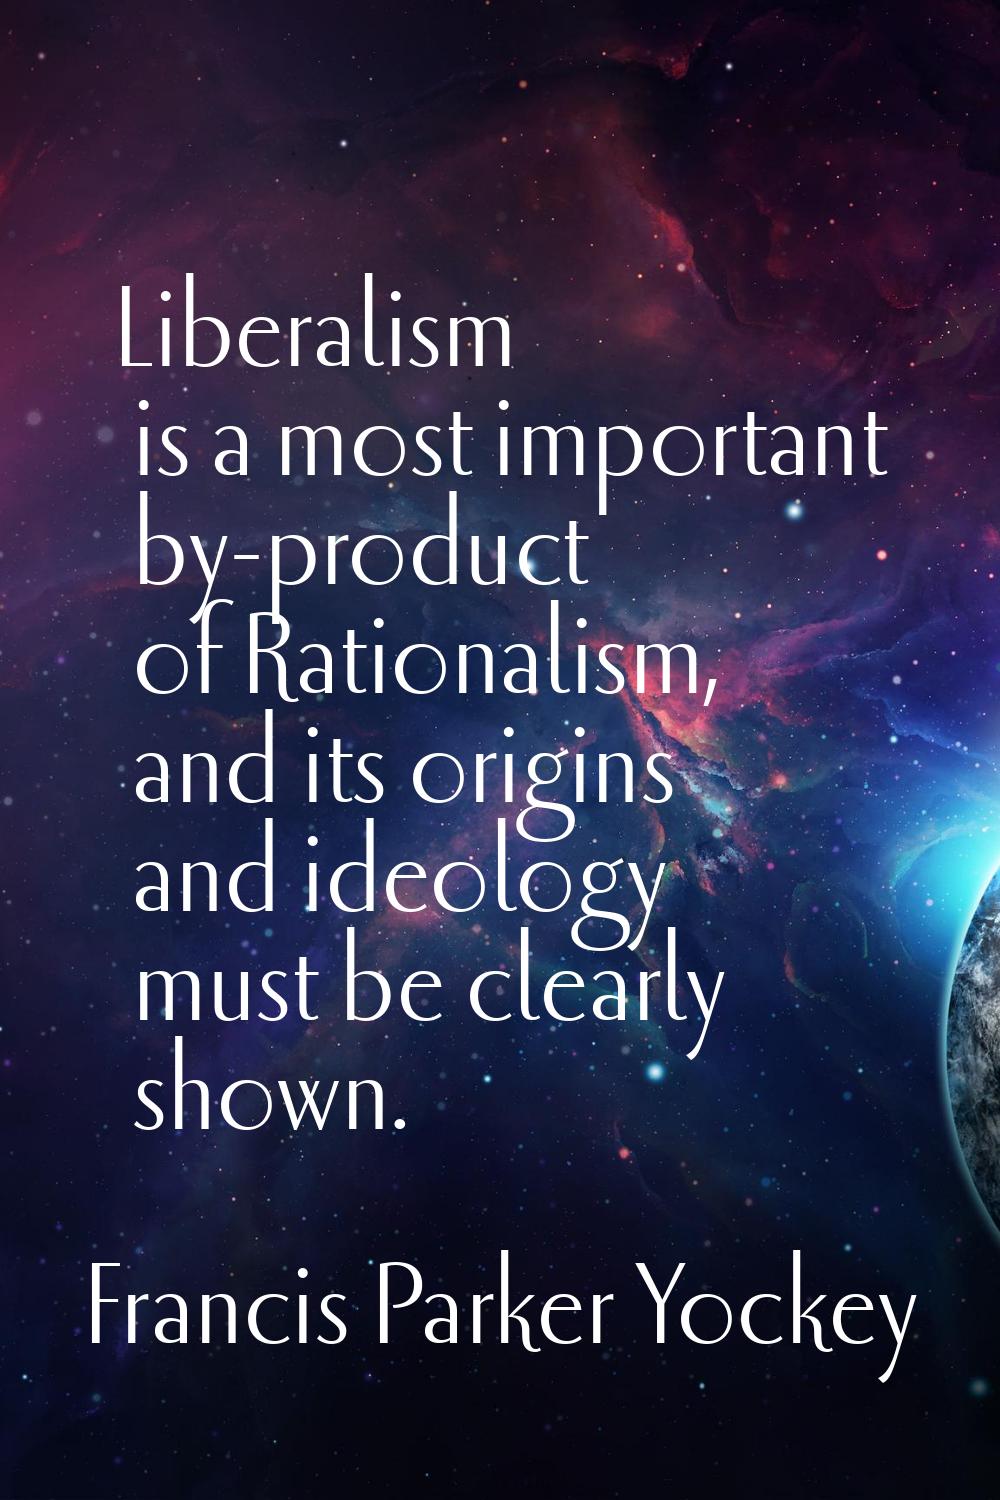 Liberalism is a most important by-product of Rationalism, and its origins and ideology must be clea